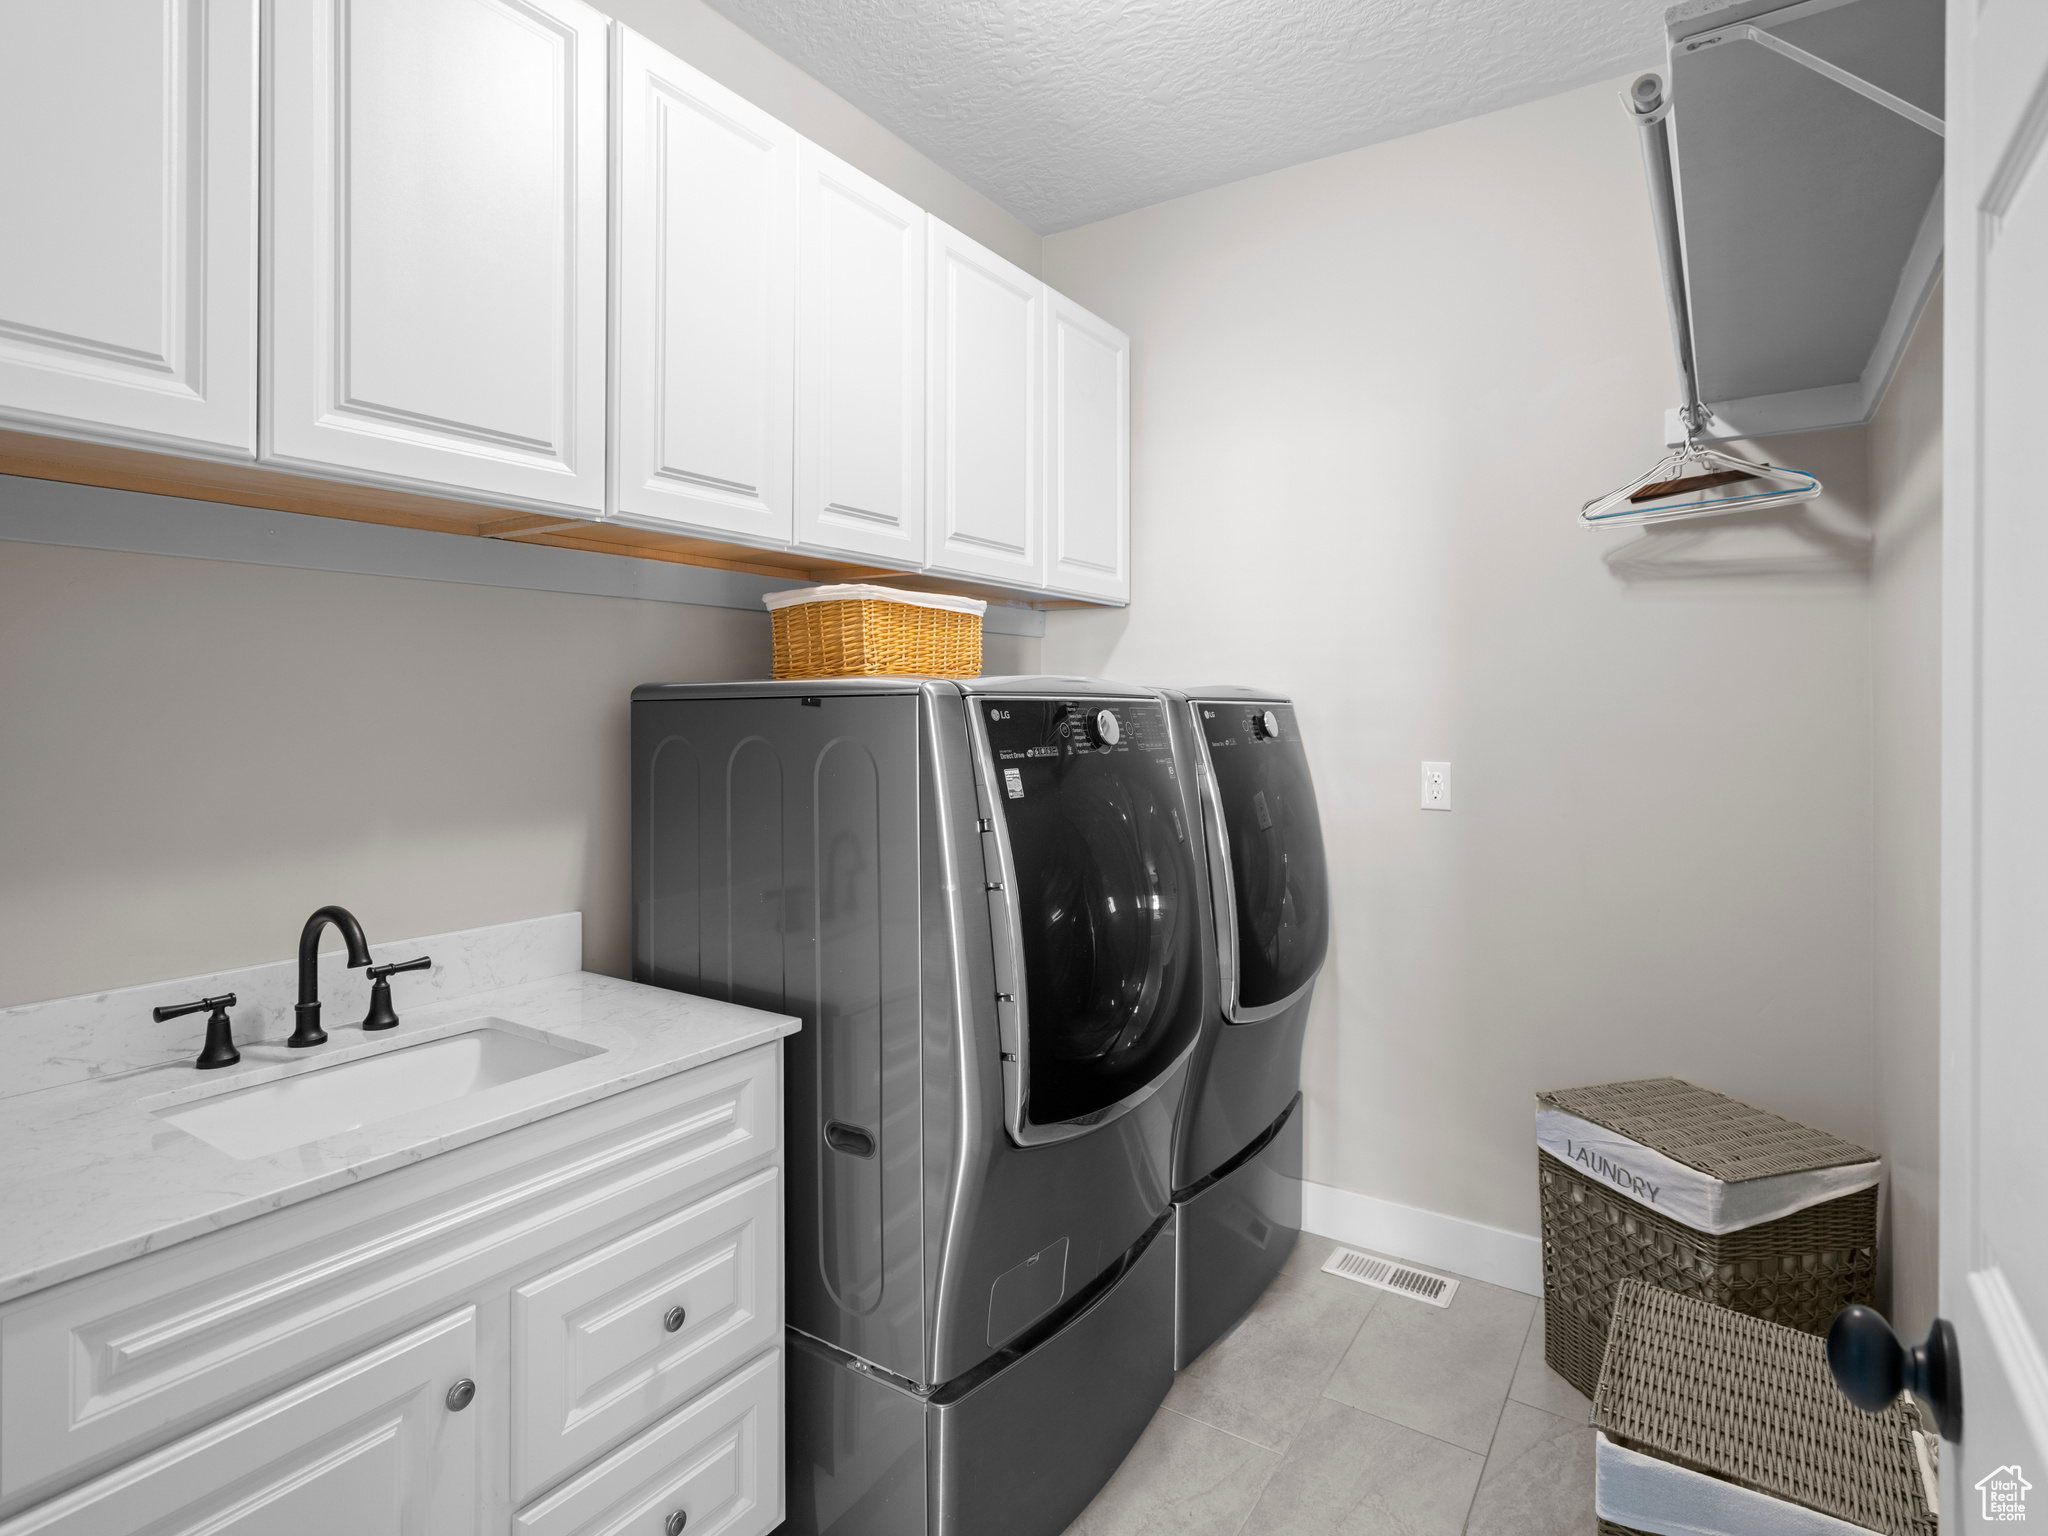 Laundry area featuring washing machine and dryer, cabinets, sink, light tile floors, and a textured ceiling